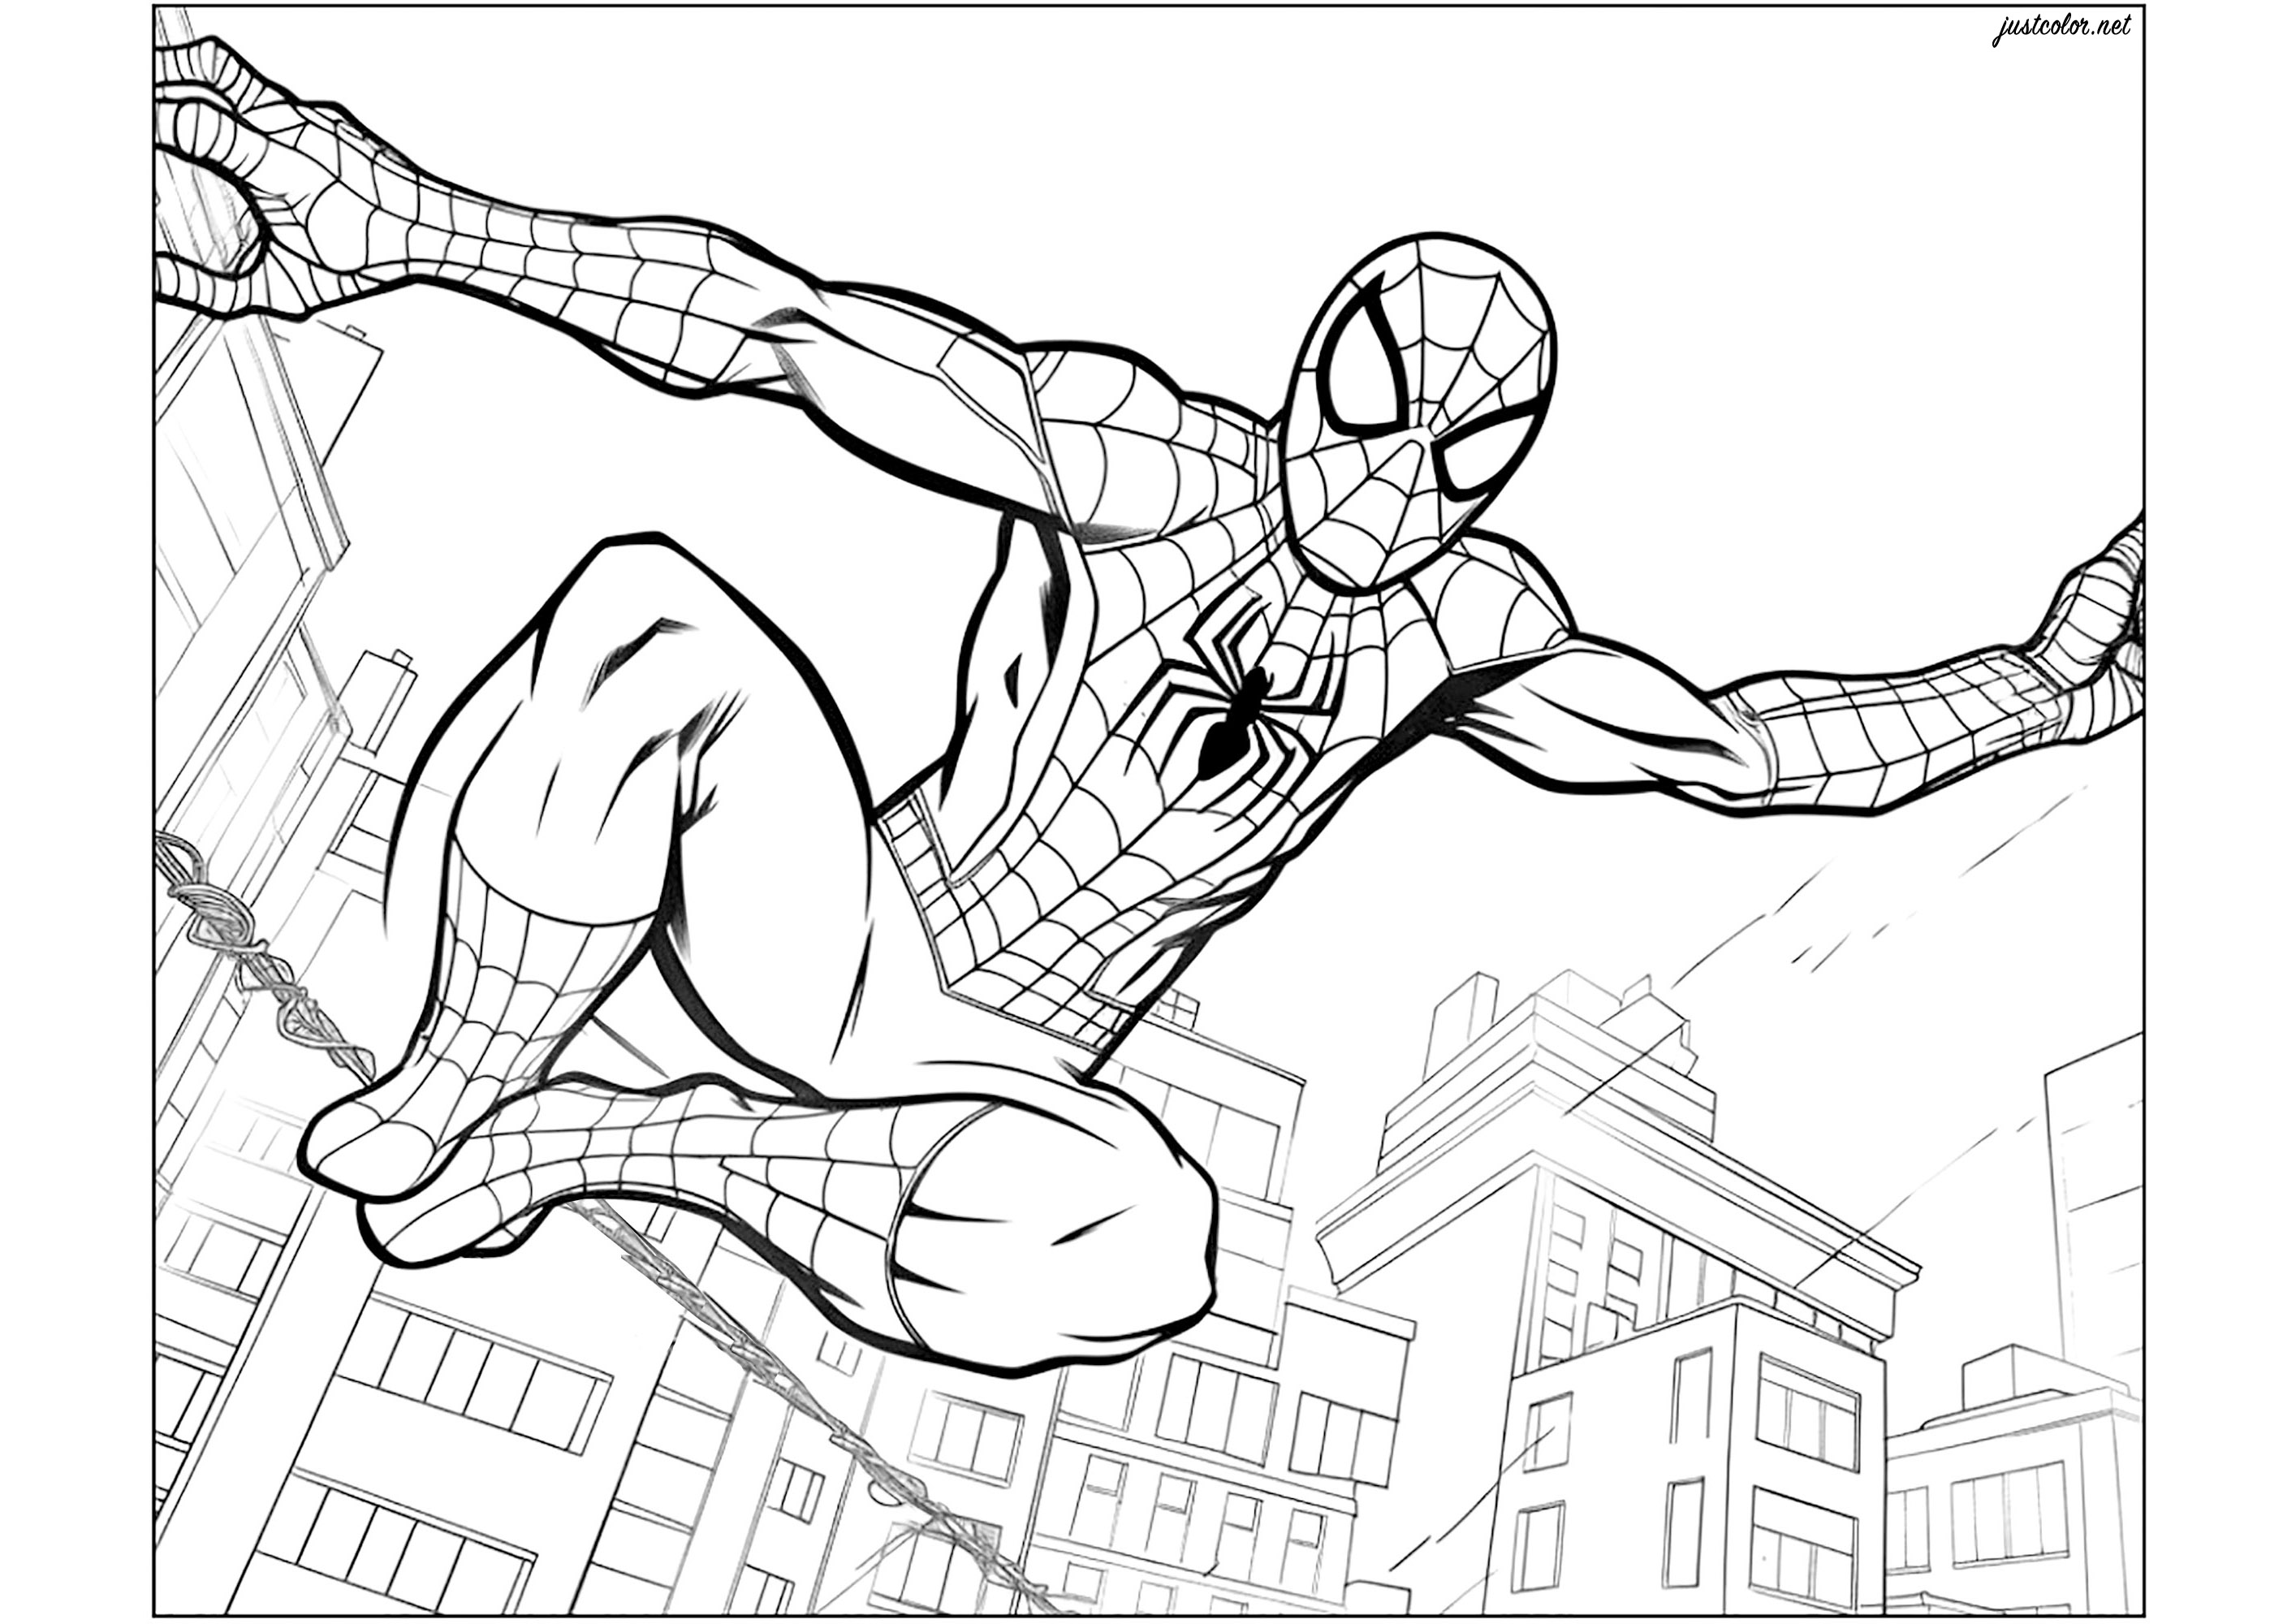 Spiderman above the rooftops of New York City - Books Adult Coloring Pages